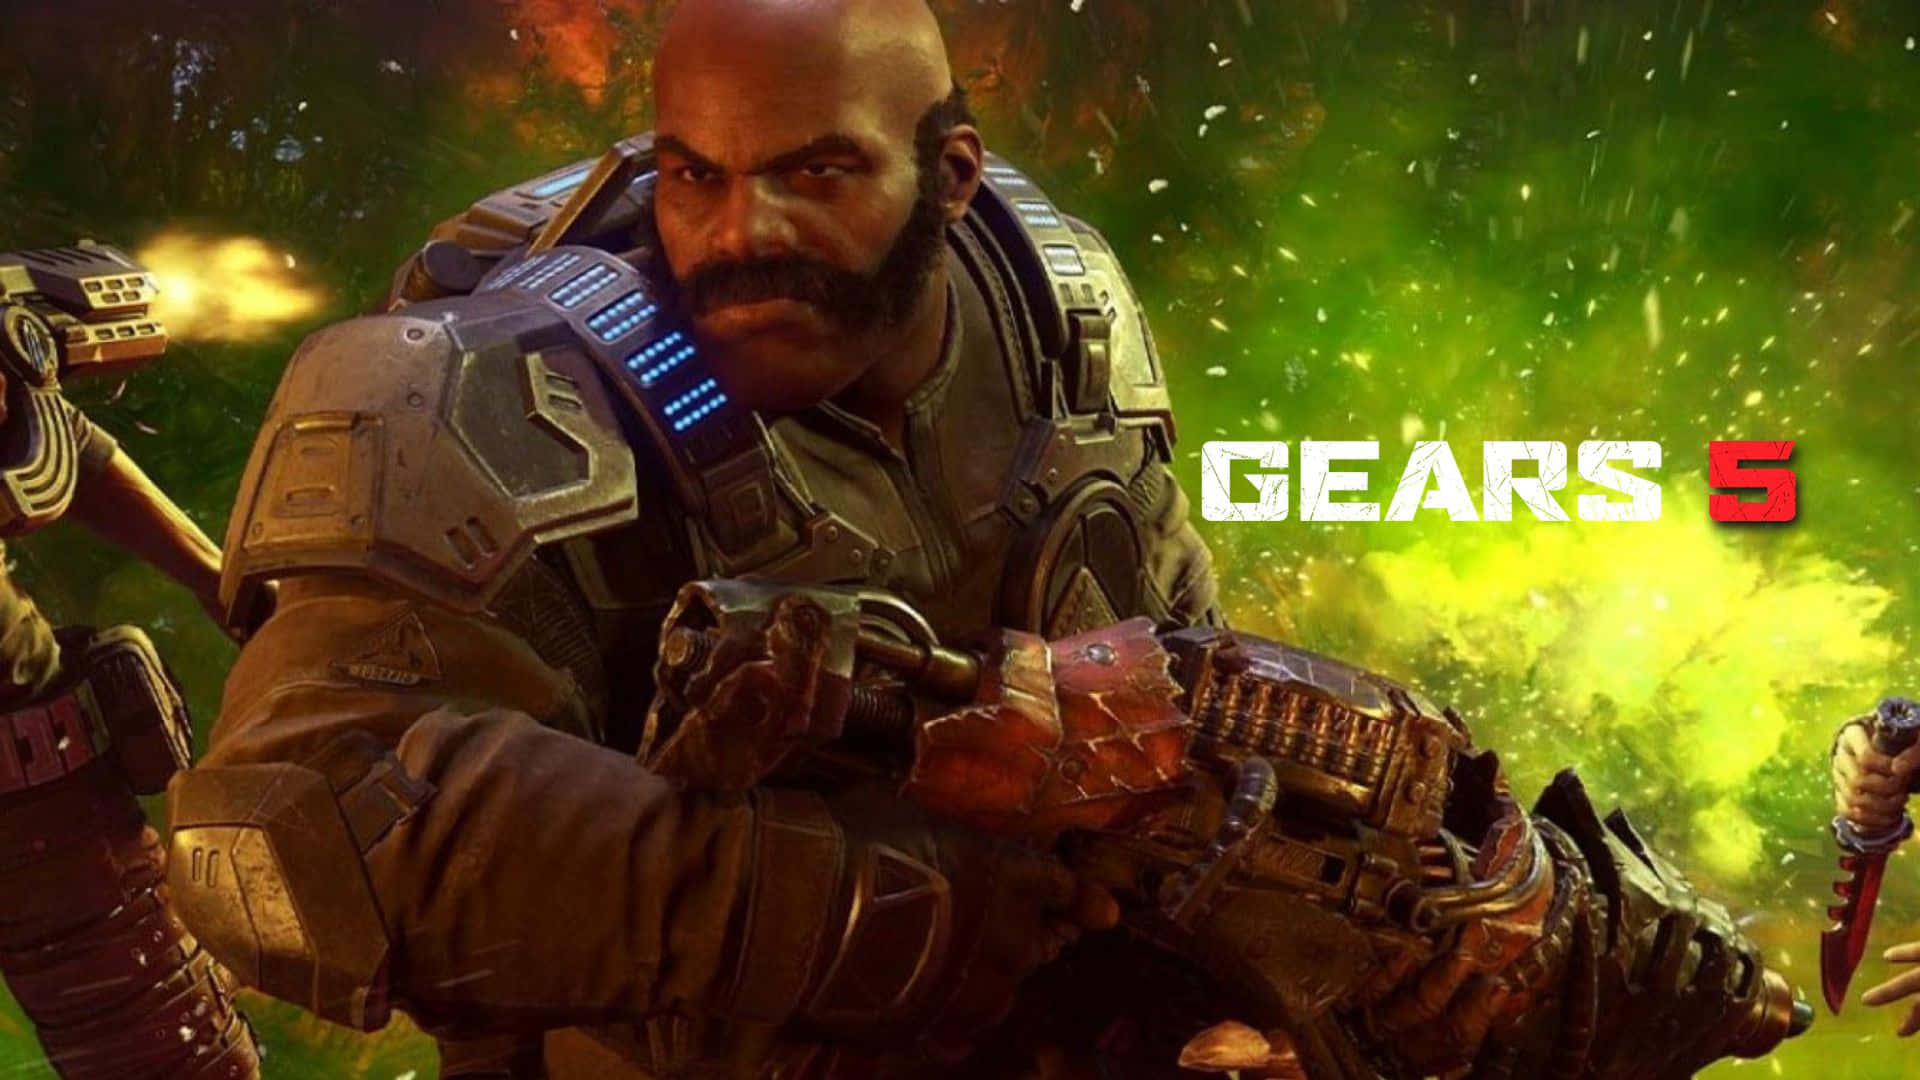 From the hit Xbox title Gears of War 5, fight your way through a horde of monsters and complete the mission